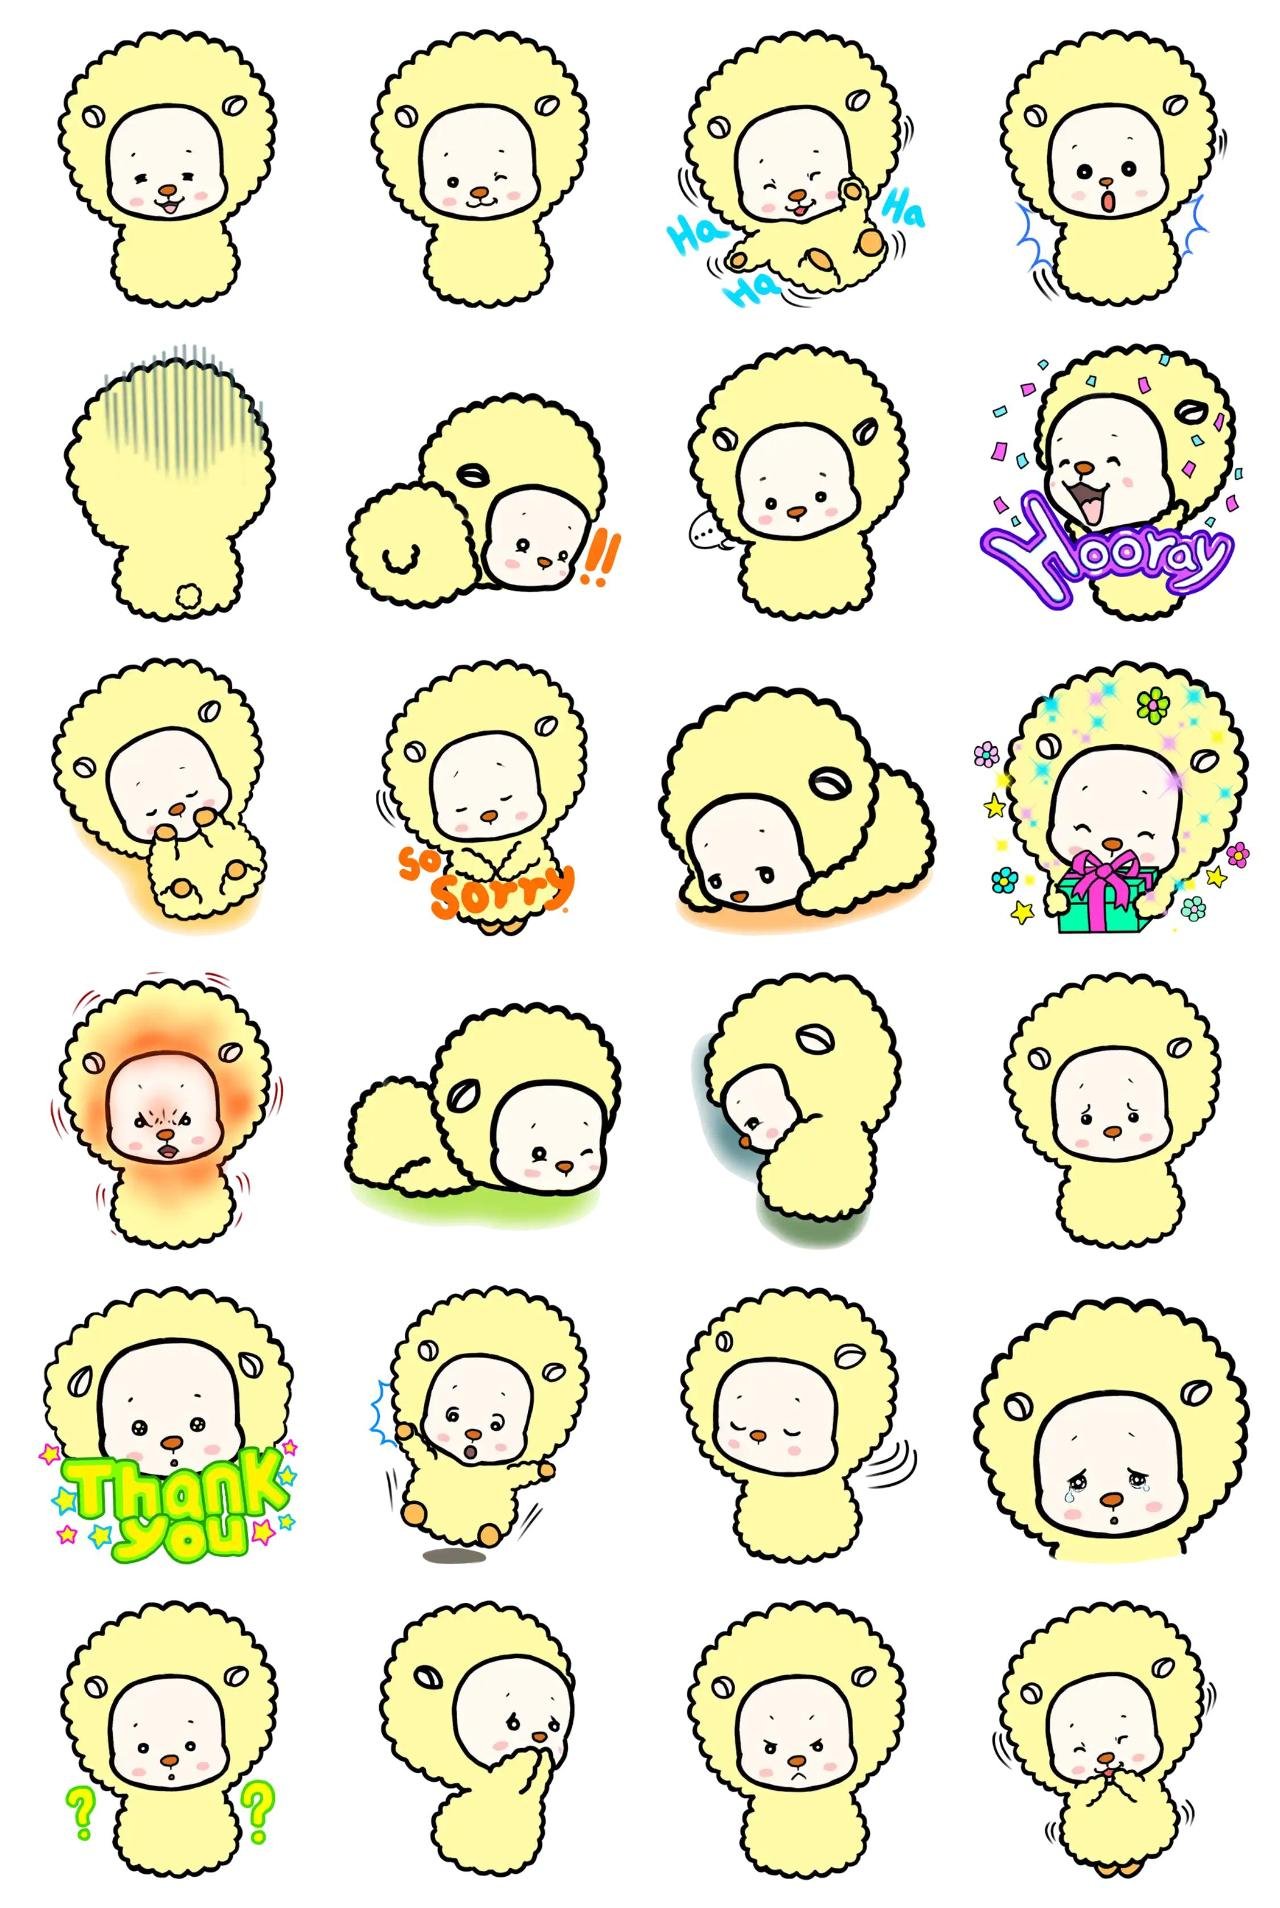 Baby sheep Boksiri Animals sticker pack for Whatsapp, Telegram, Signal, and others chatting and message apps